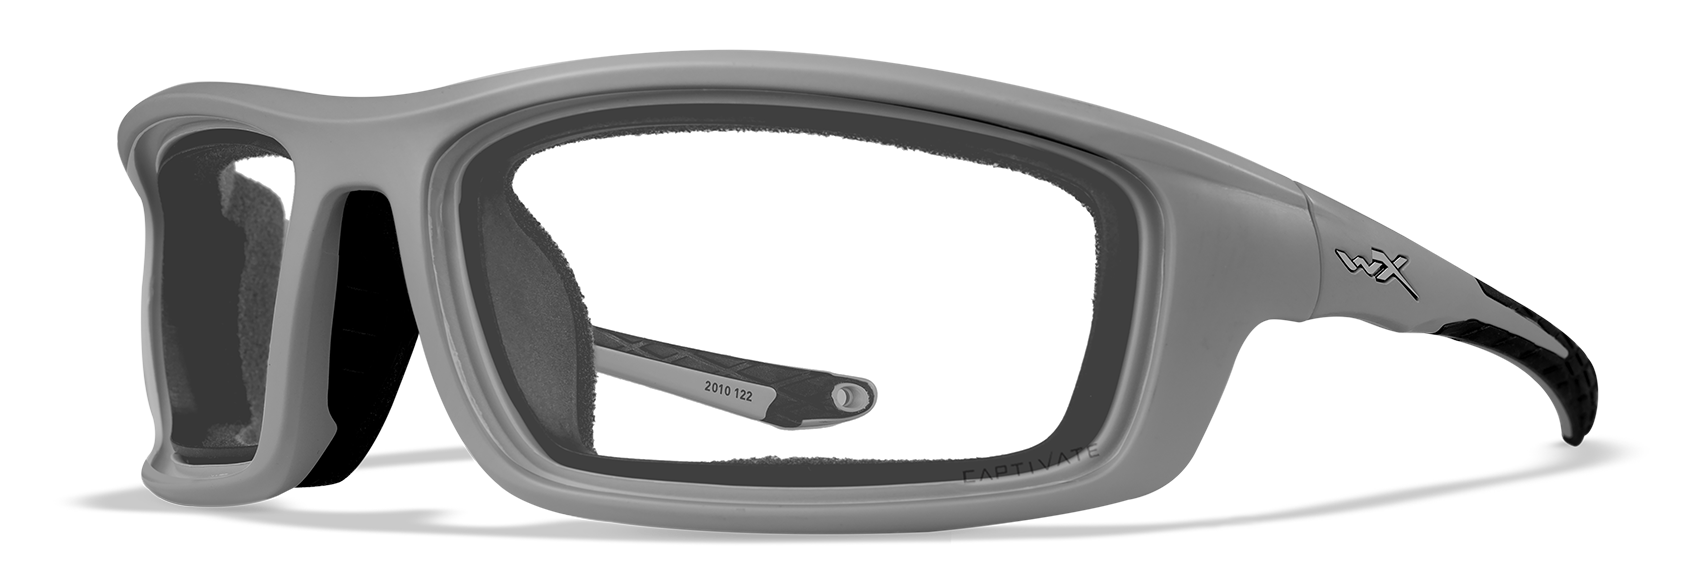 Wiley X WX GRID Oval Sunglasses  Matte Cool Grey 70-18-122